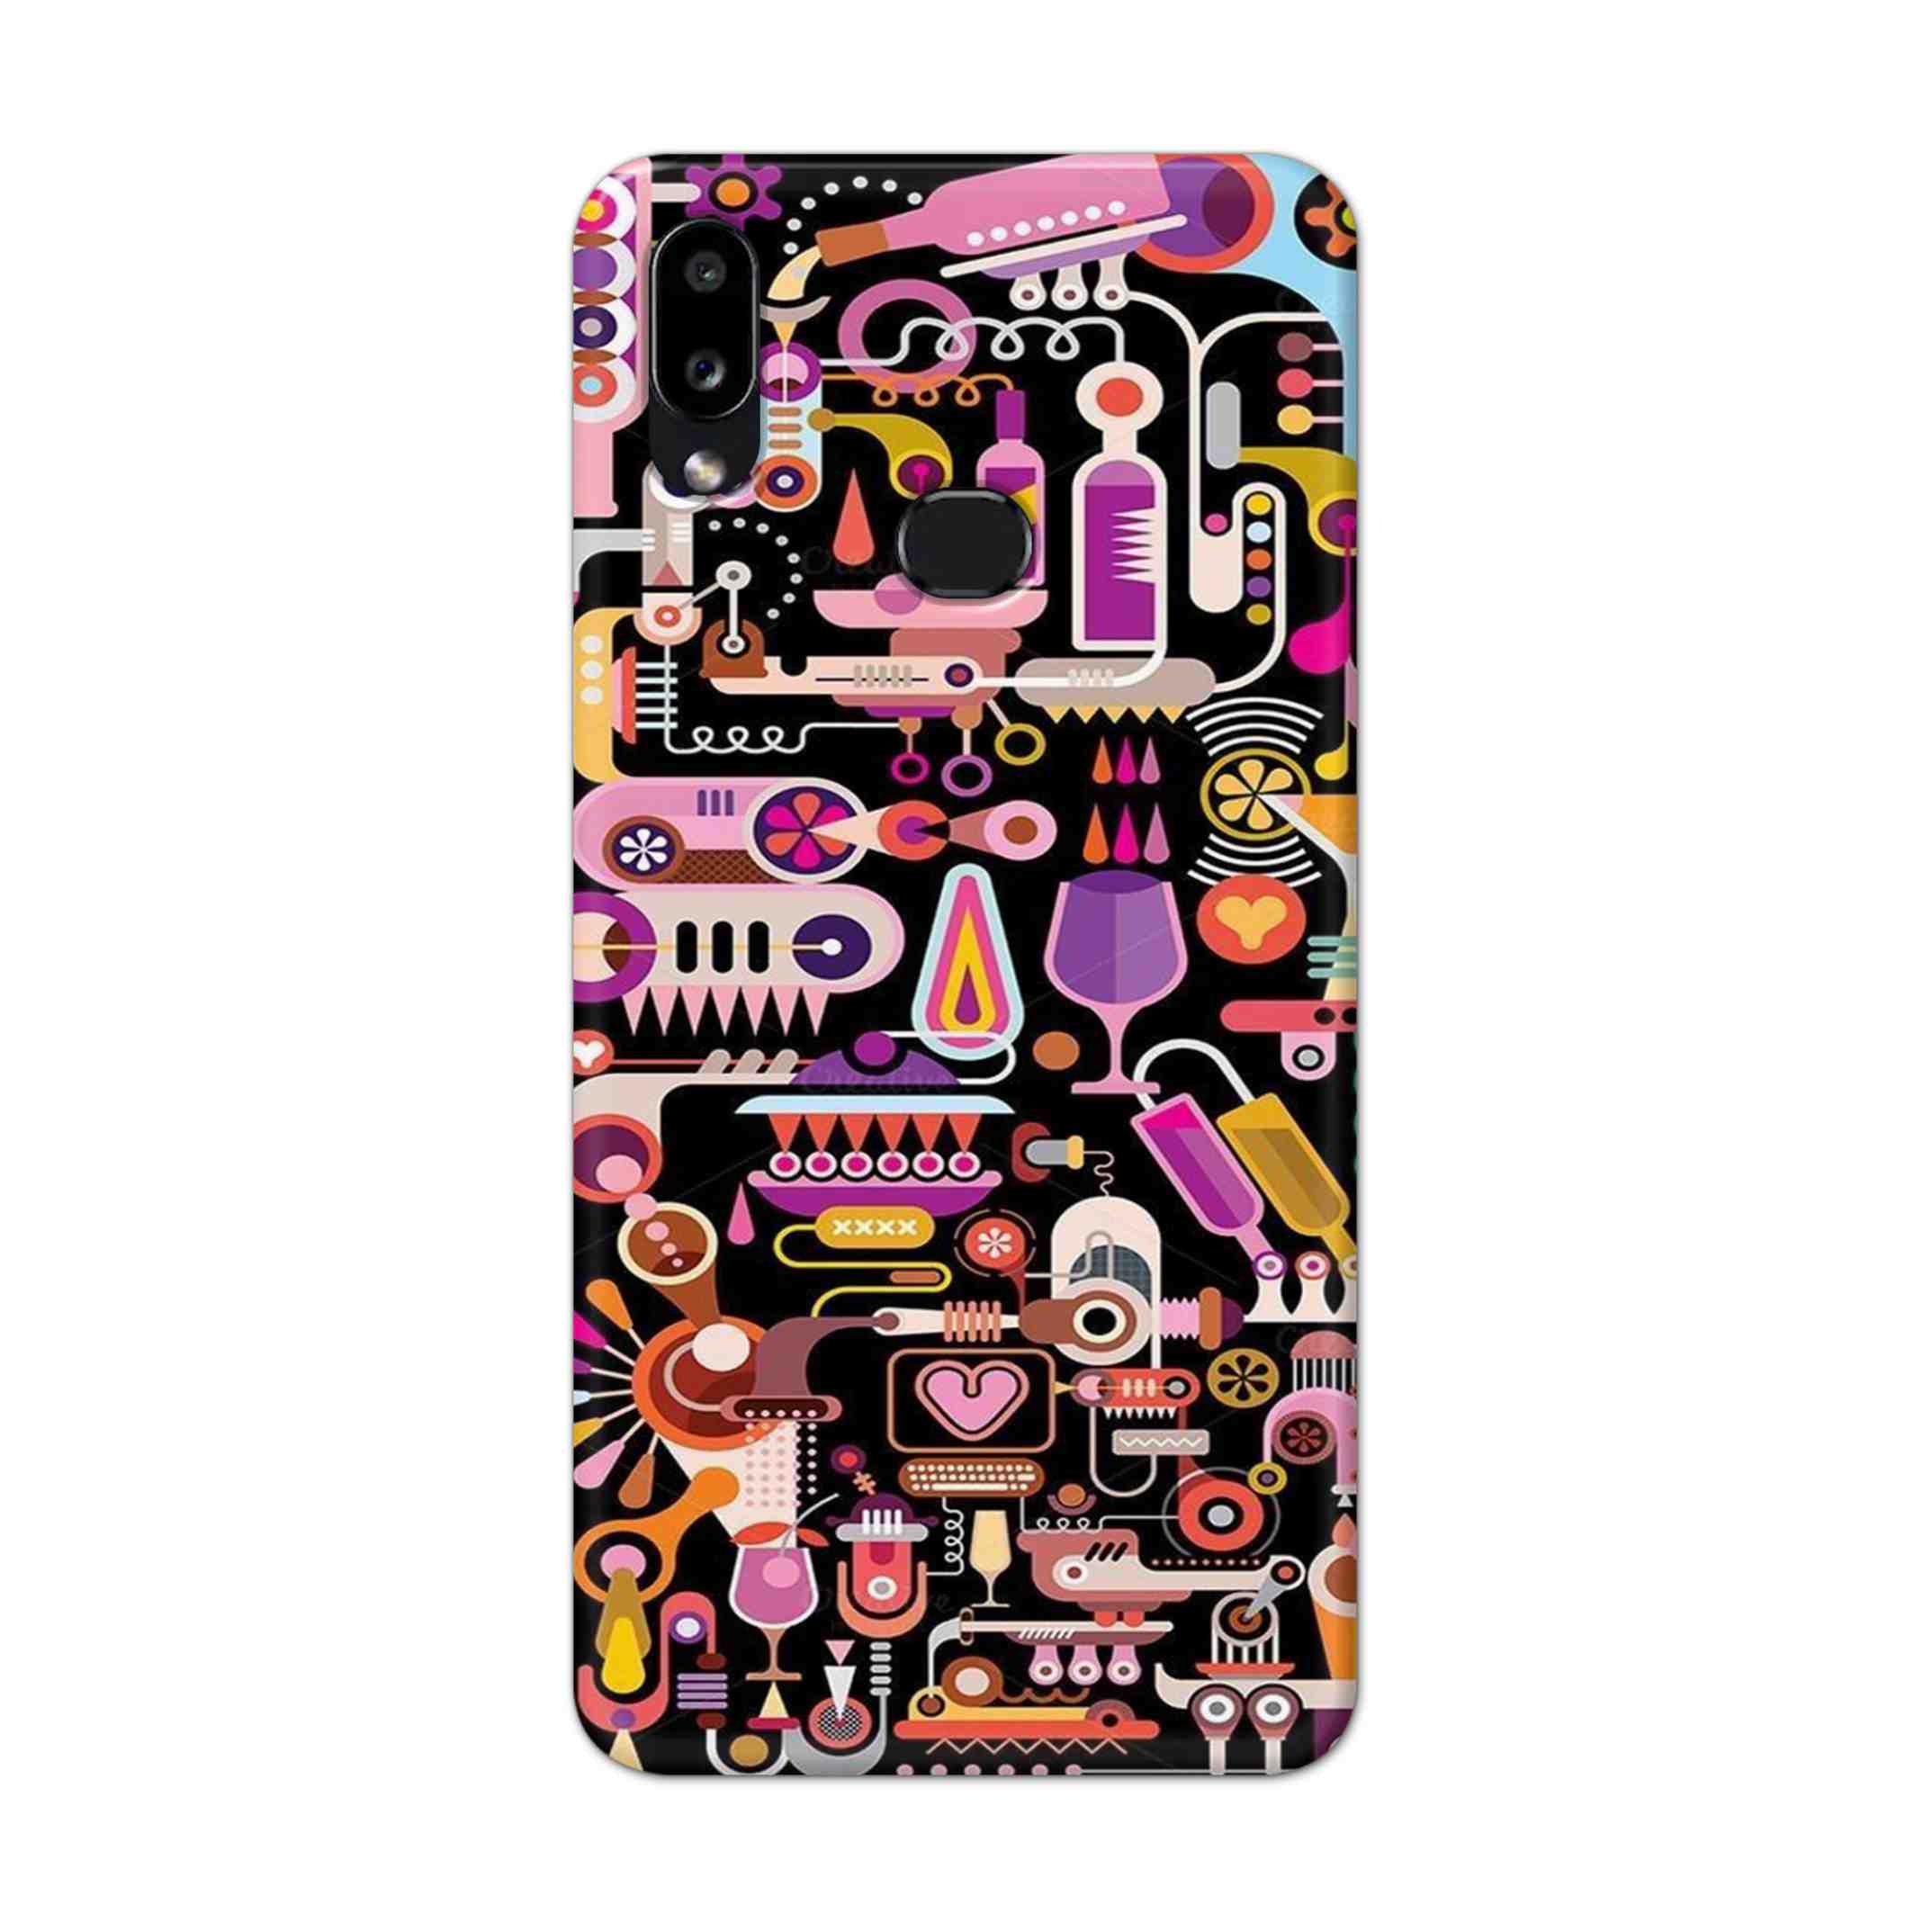 Buy Lab Art Hard Back Mobile Phone Case Cover For Samsung Galaxy M01s Online